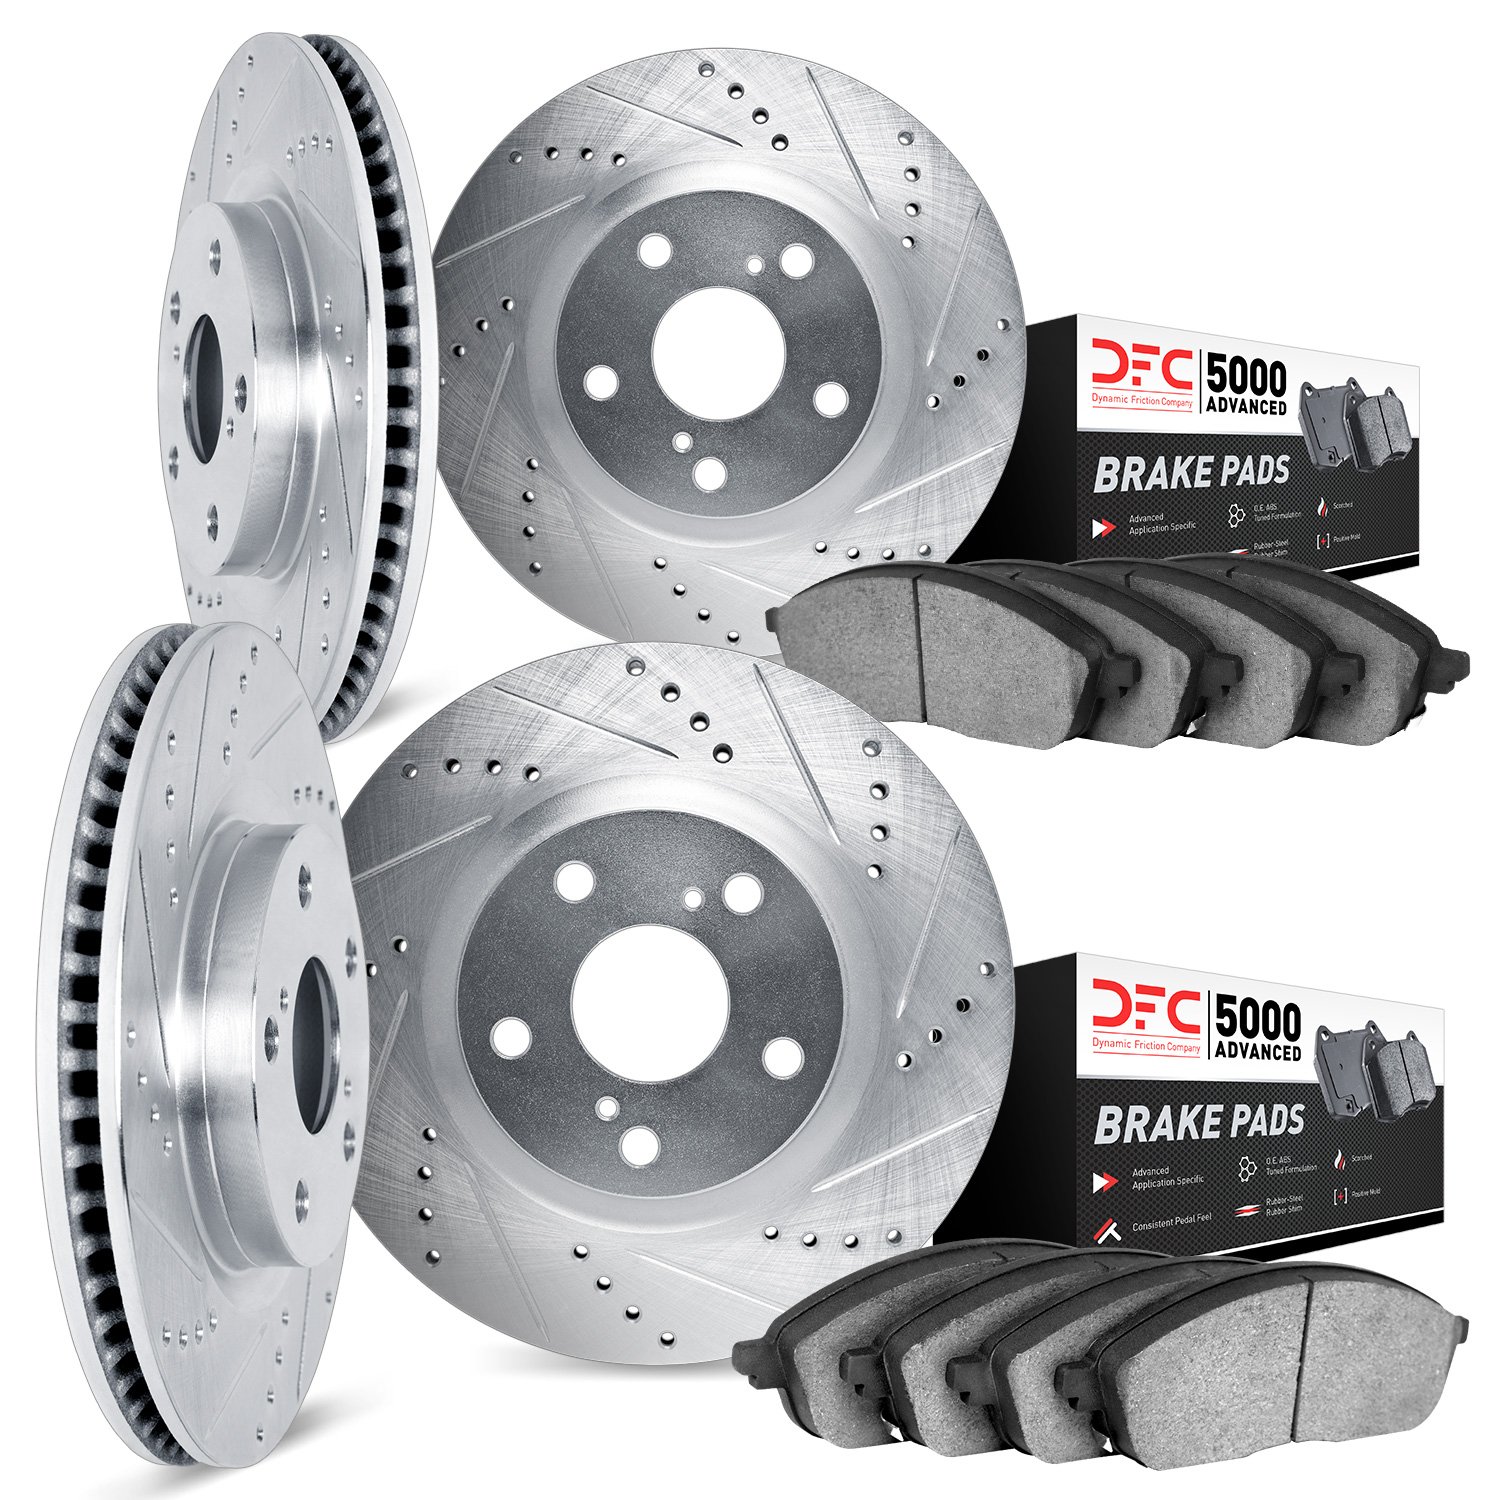 7504-74080 Drilled/Slotted Brake Rotors w/5000 Advanced Brake Pads Kit [Silver], 2004-2007 Audi/Volkswagen, Position: Front and